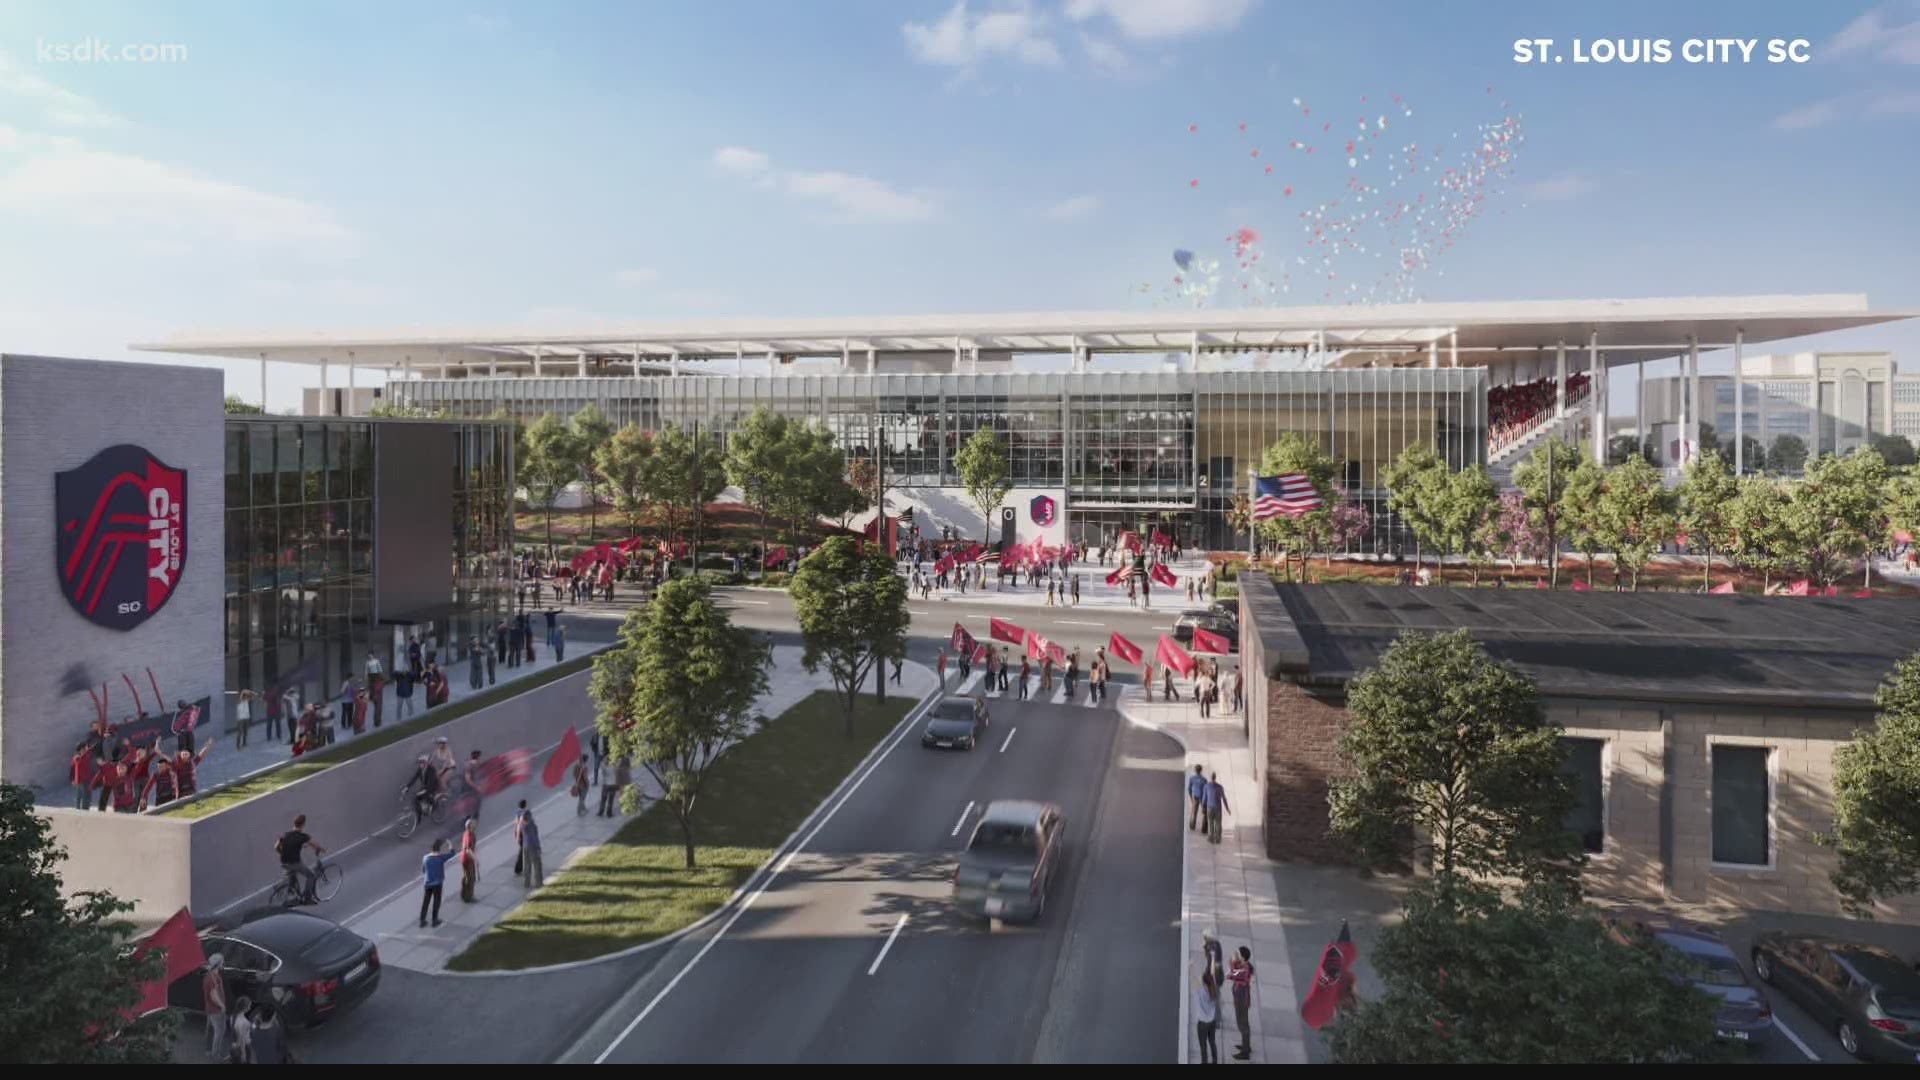 St. Louis City SC releases new renderings of downtown stadium | www.semashow.com